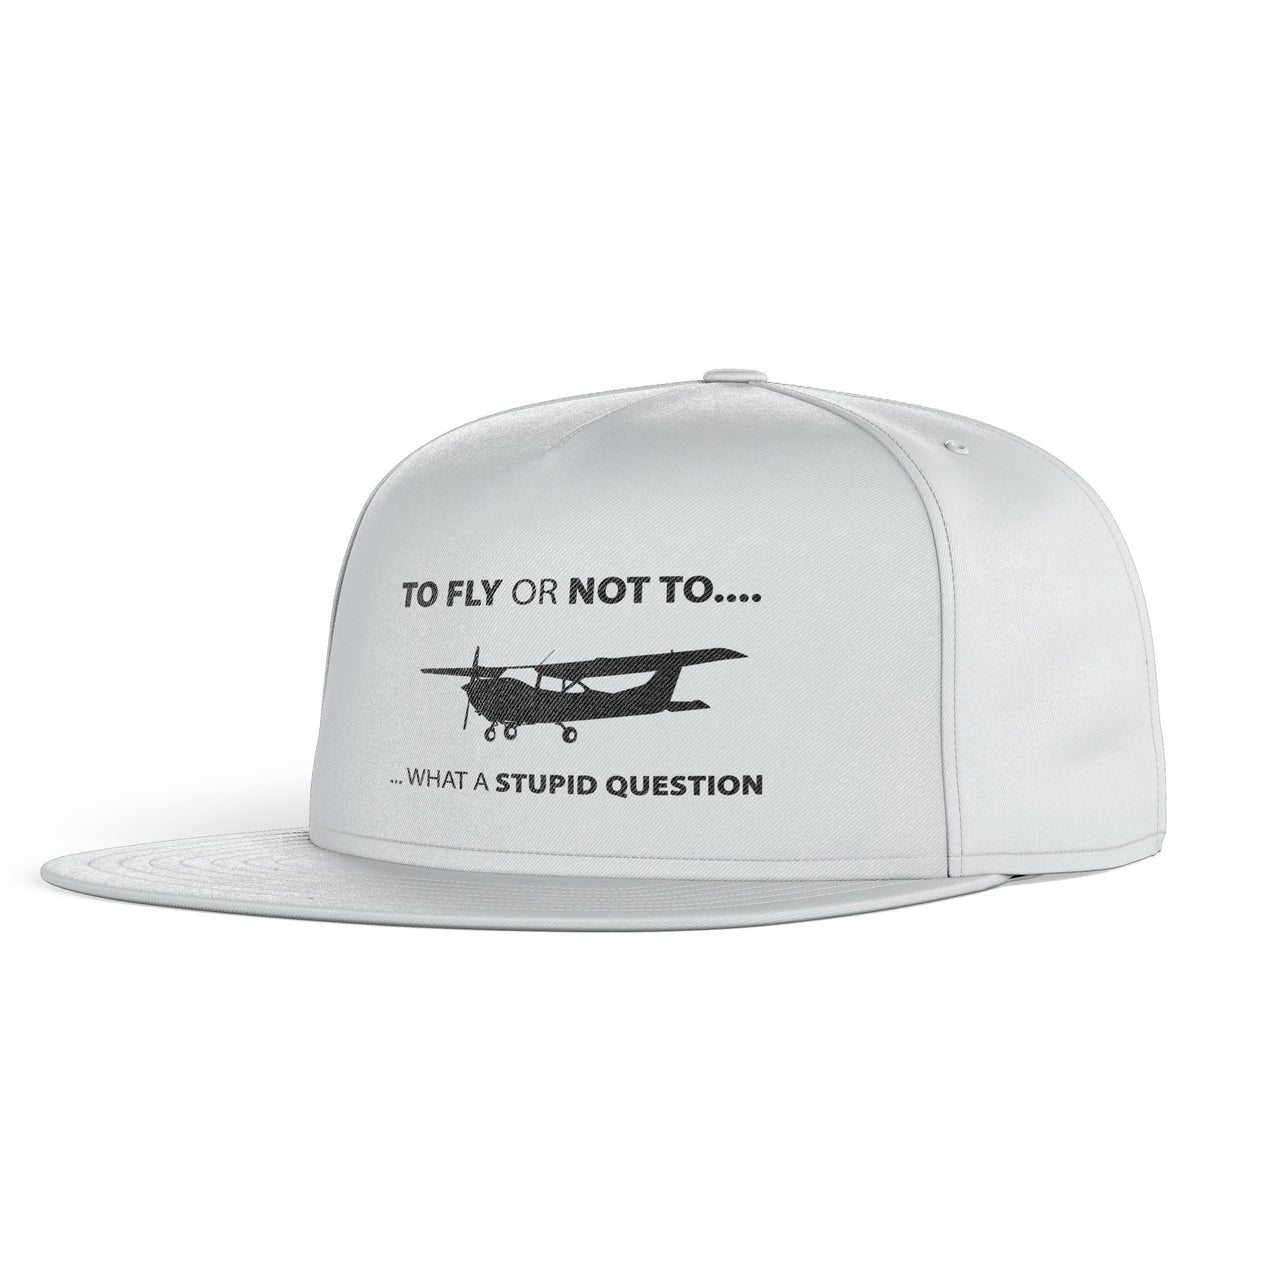 To Fly or Not To What a Stupid Question Designed Snapback Caps & Hats